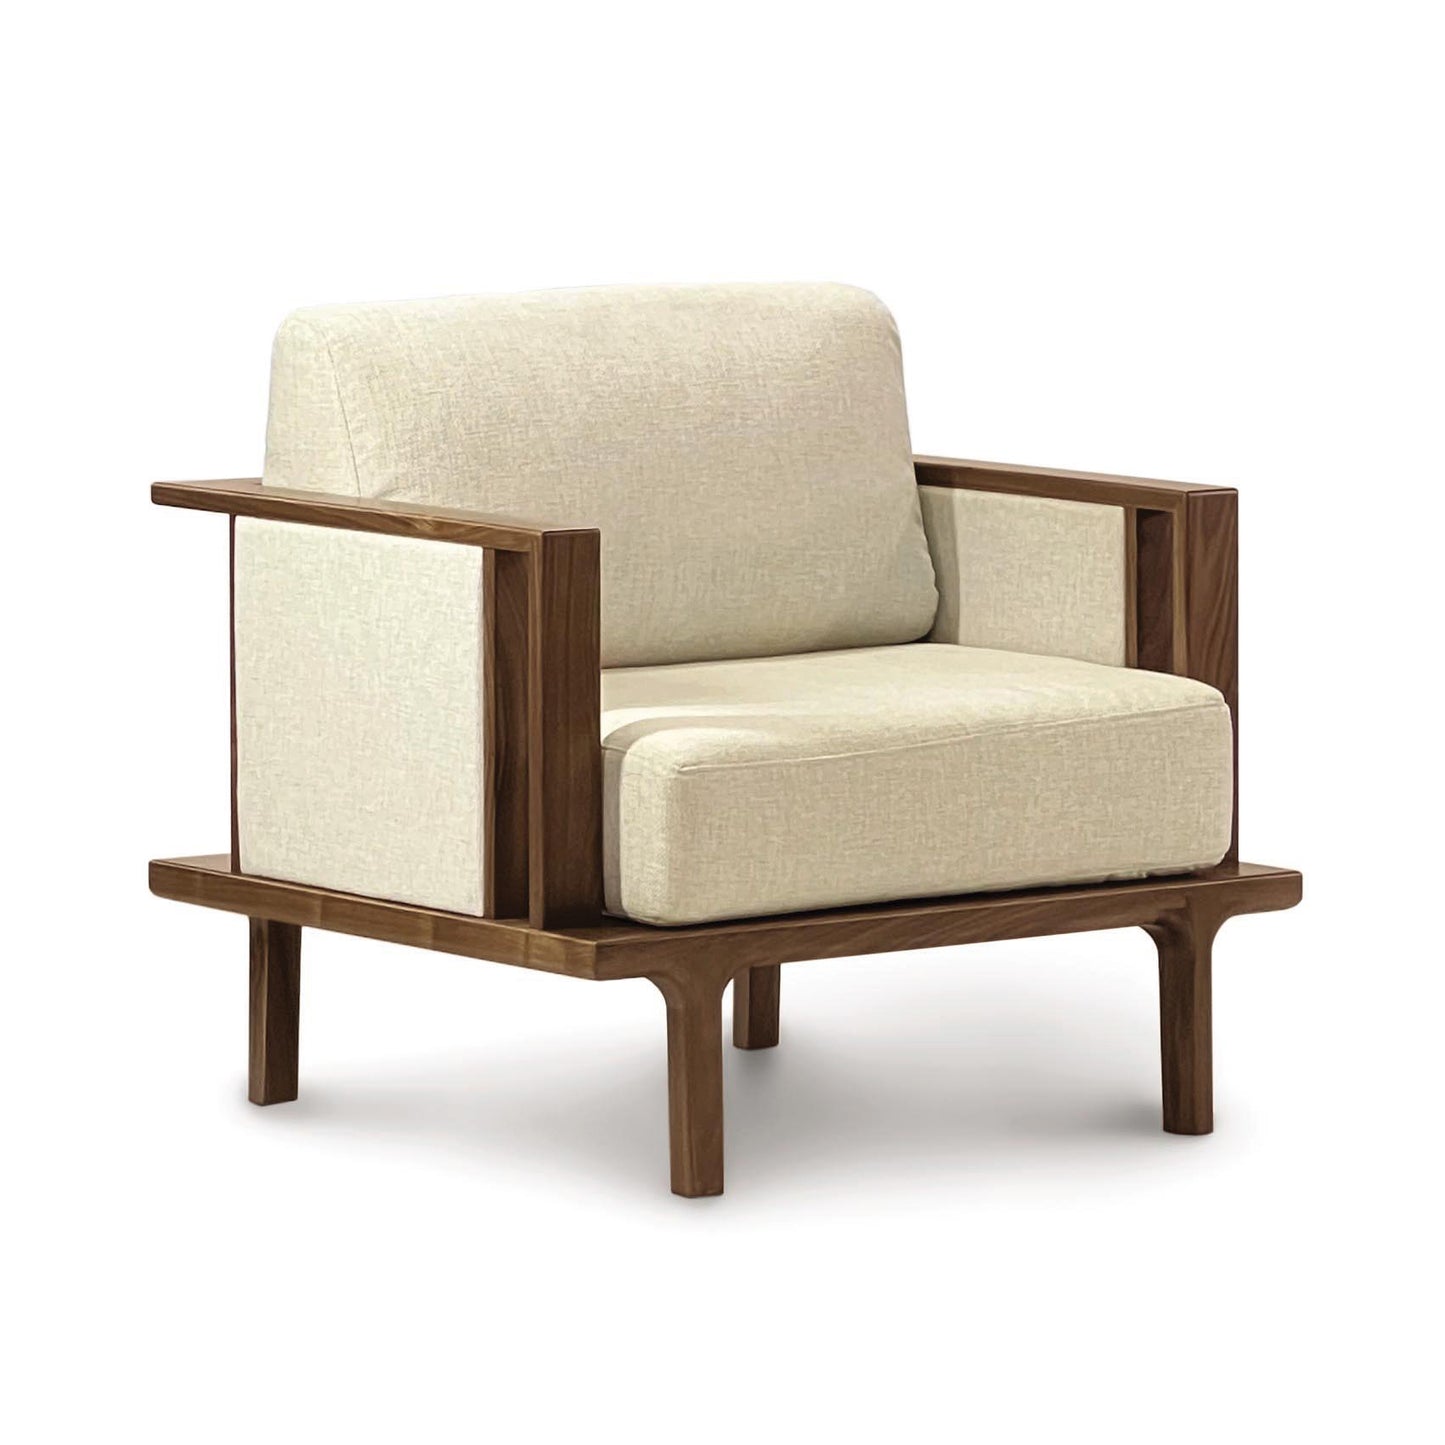 The Sierra Walnut Upholstered Chair with Upholstered Panels by Copeland Furniture features a modern design with a wooden frame and beige fabric upholstery.